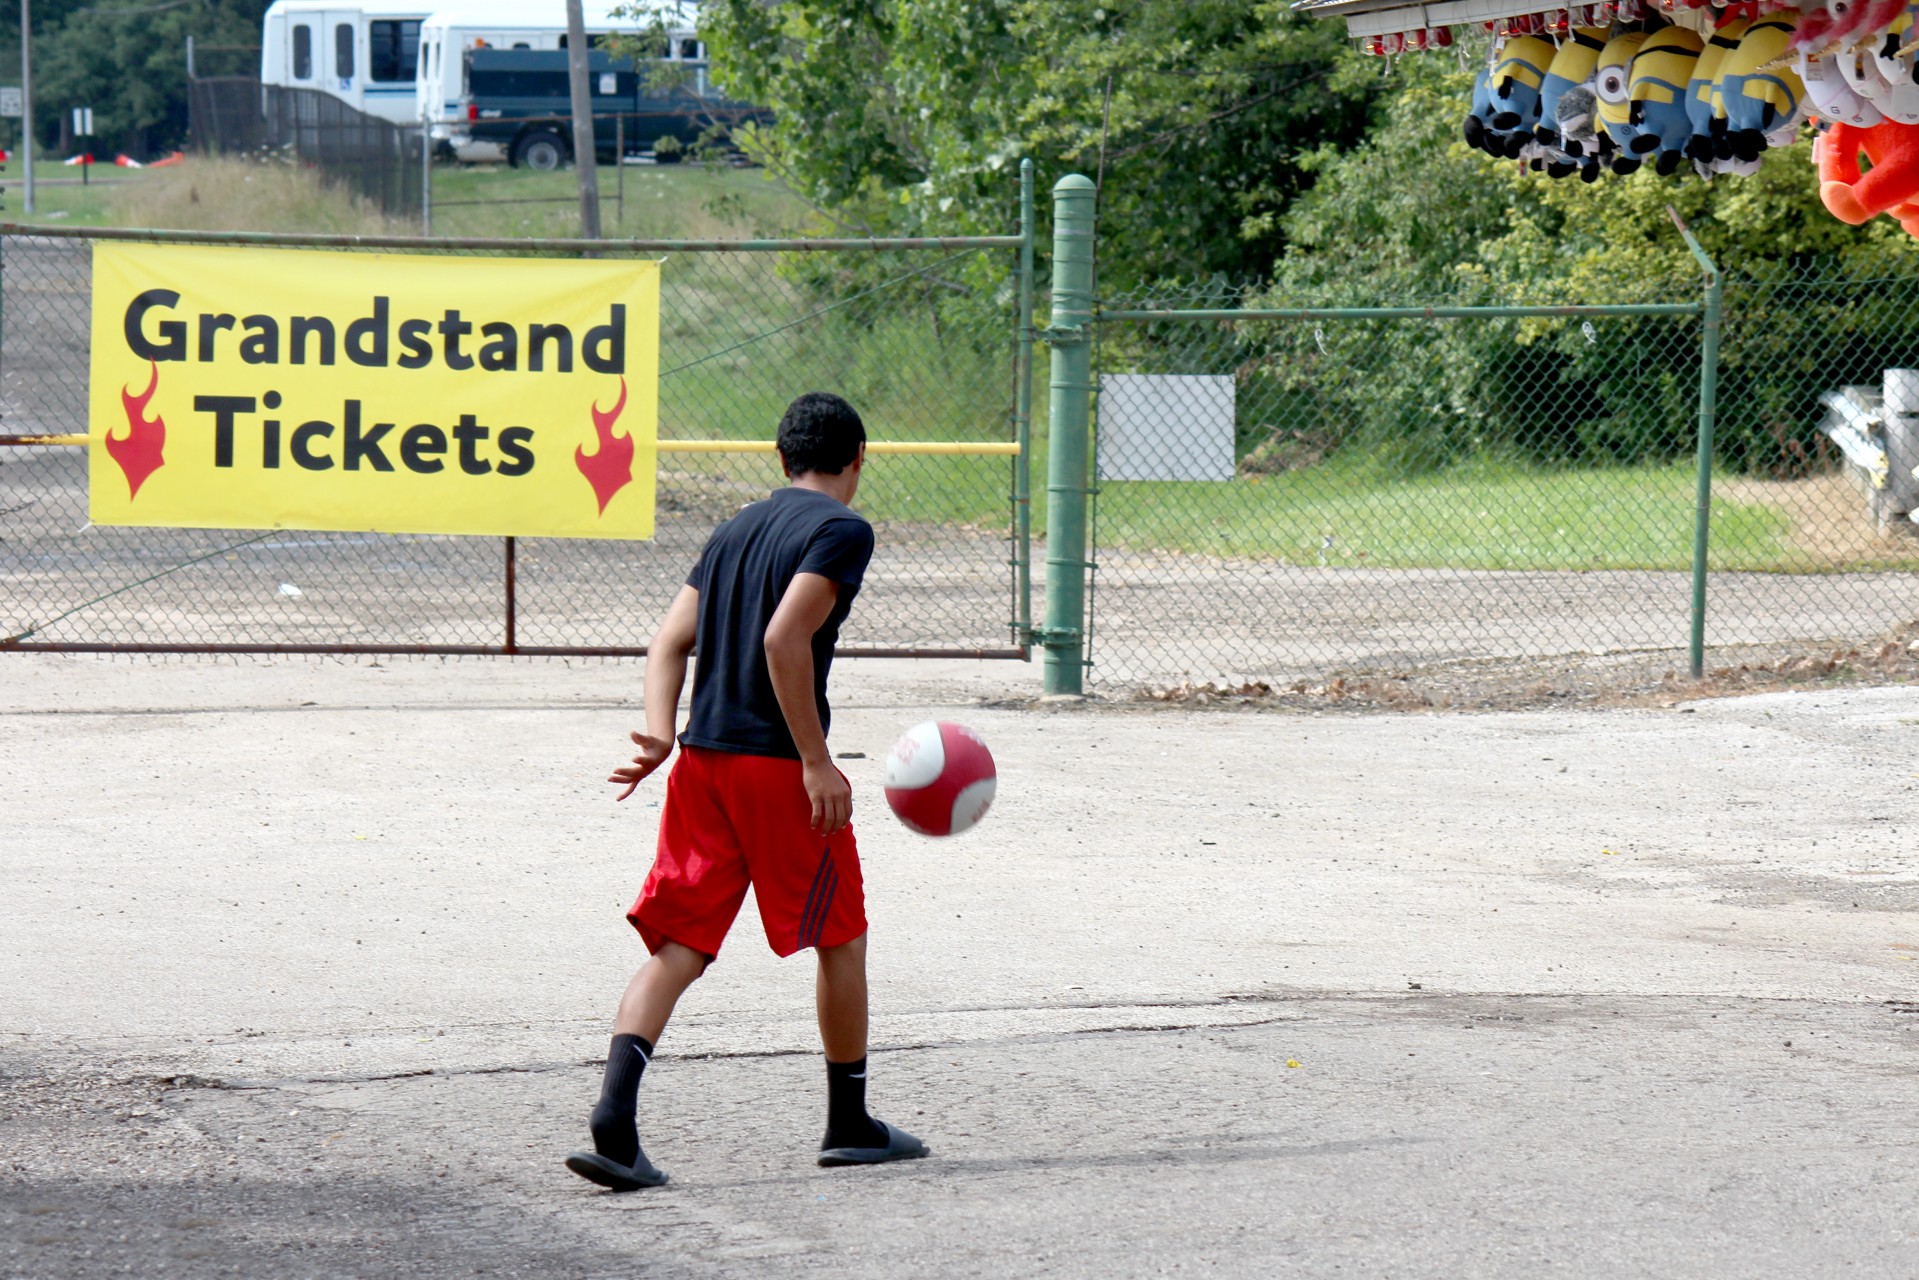 Boy with football with grandstand sign in background